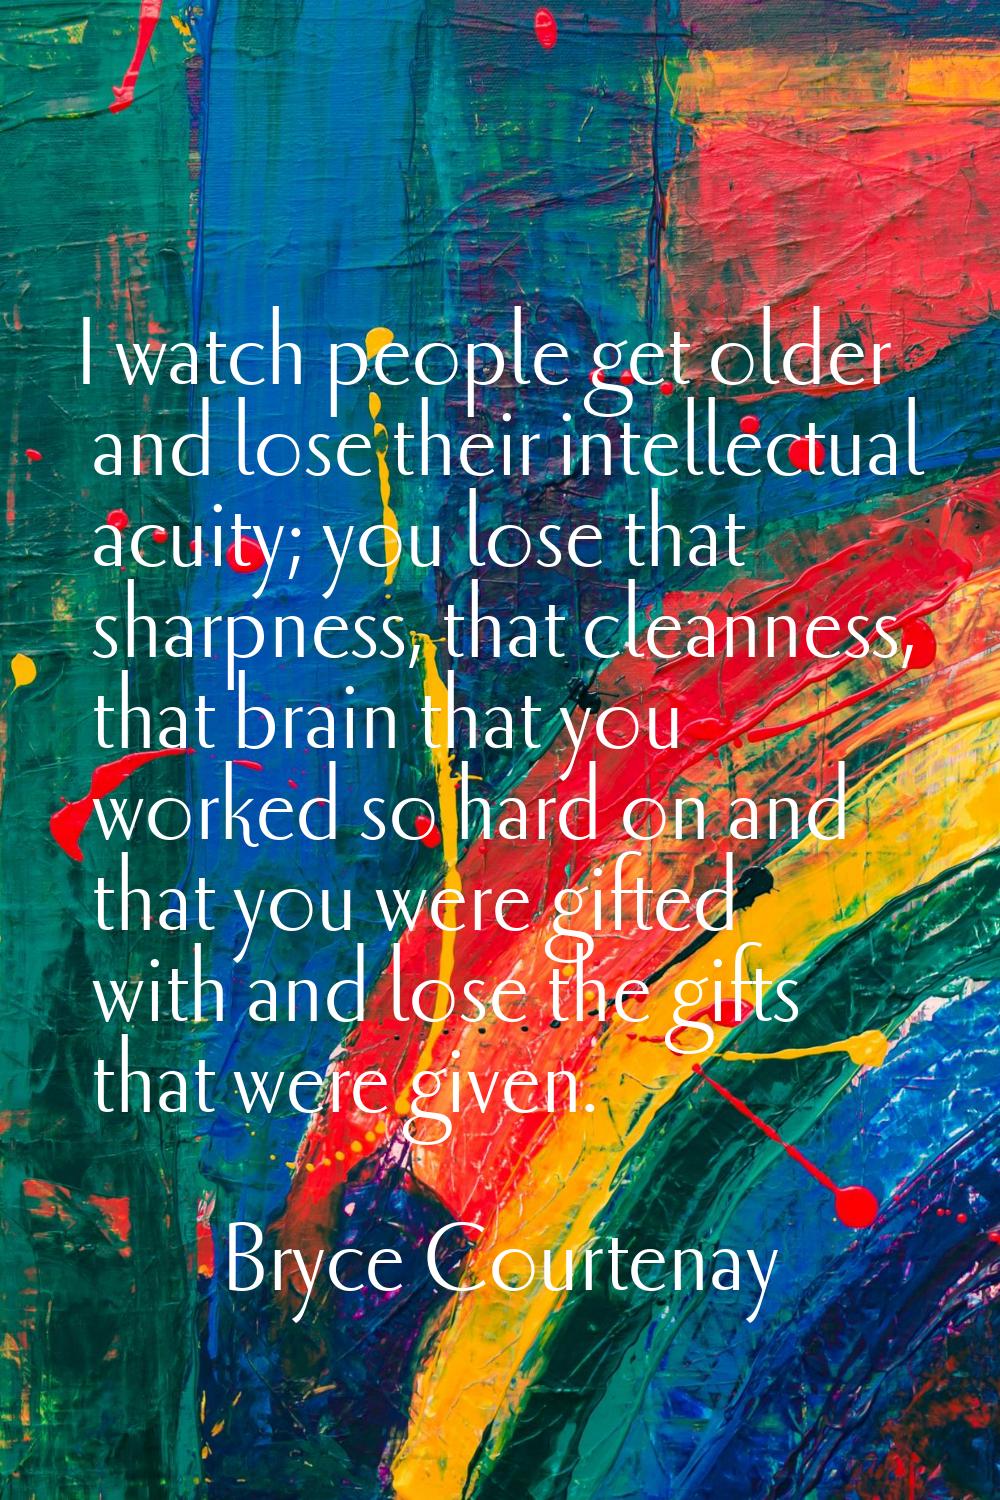 I watch people get older and lose their intellectual acuity; you lose that sharpness, that cleannes